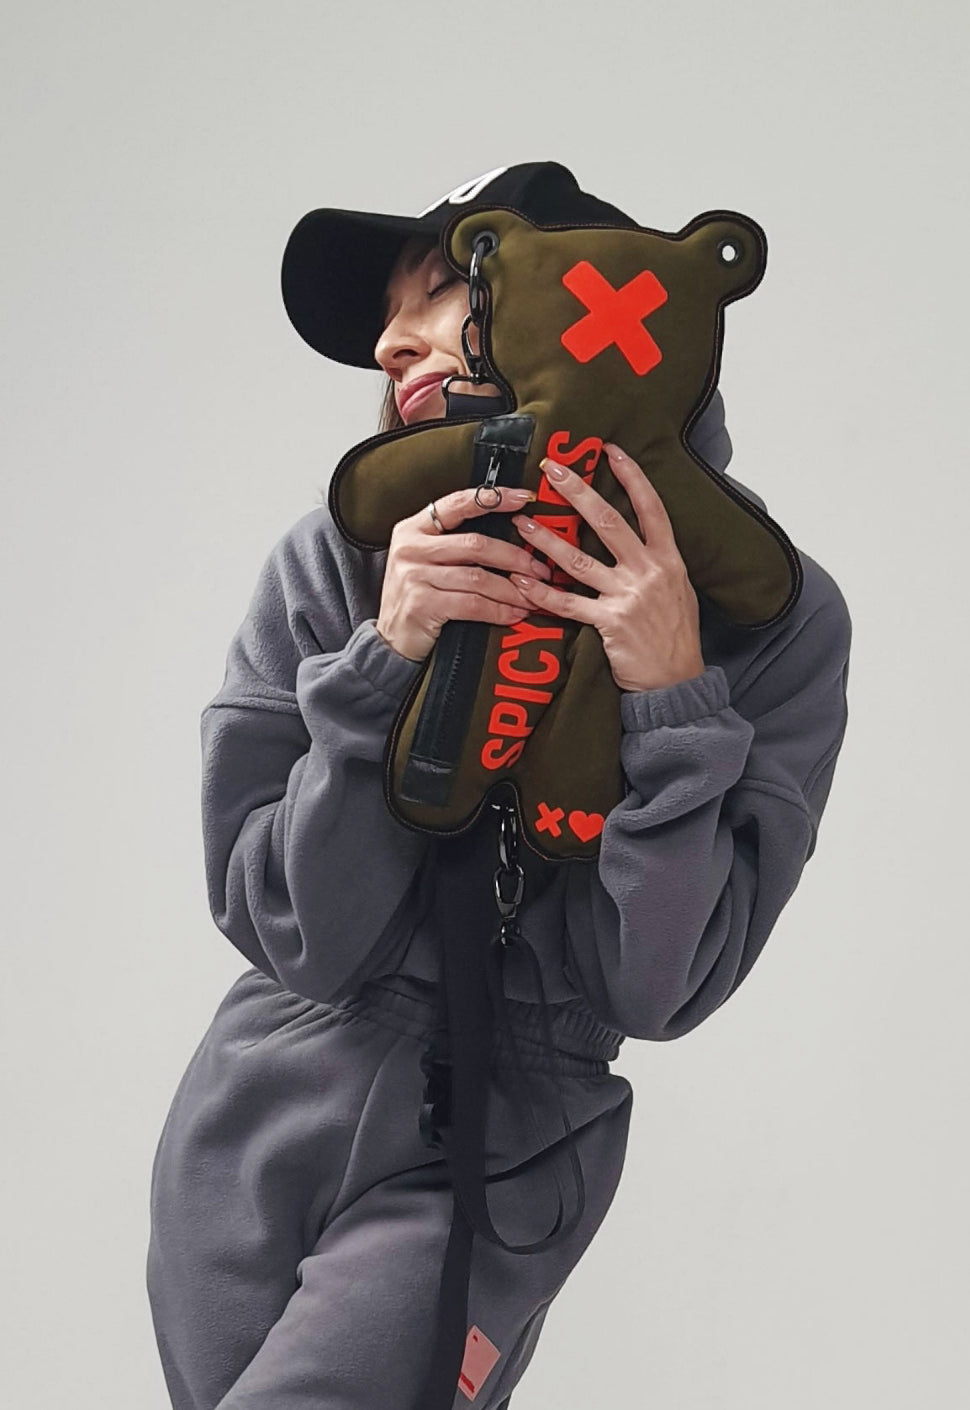 This huggable bear-inspired streetwear accessory is the perfect addition to any fashion-forward wardrobe